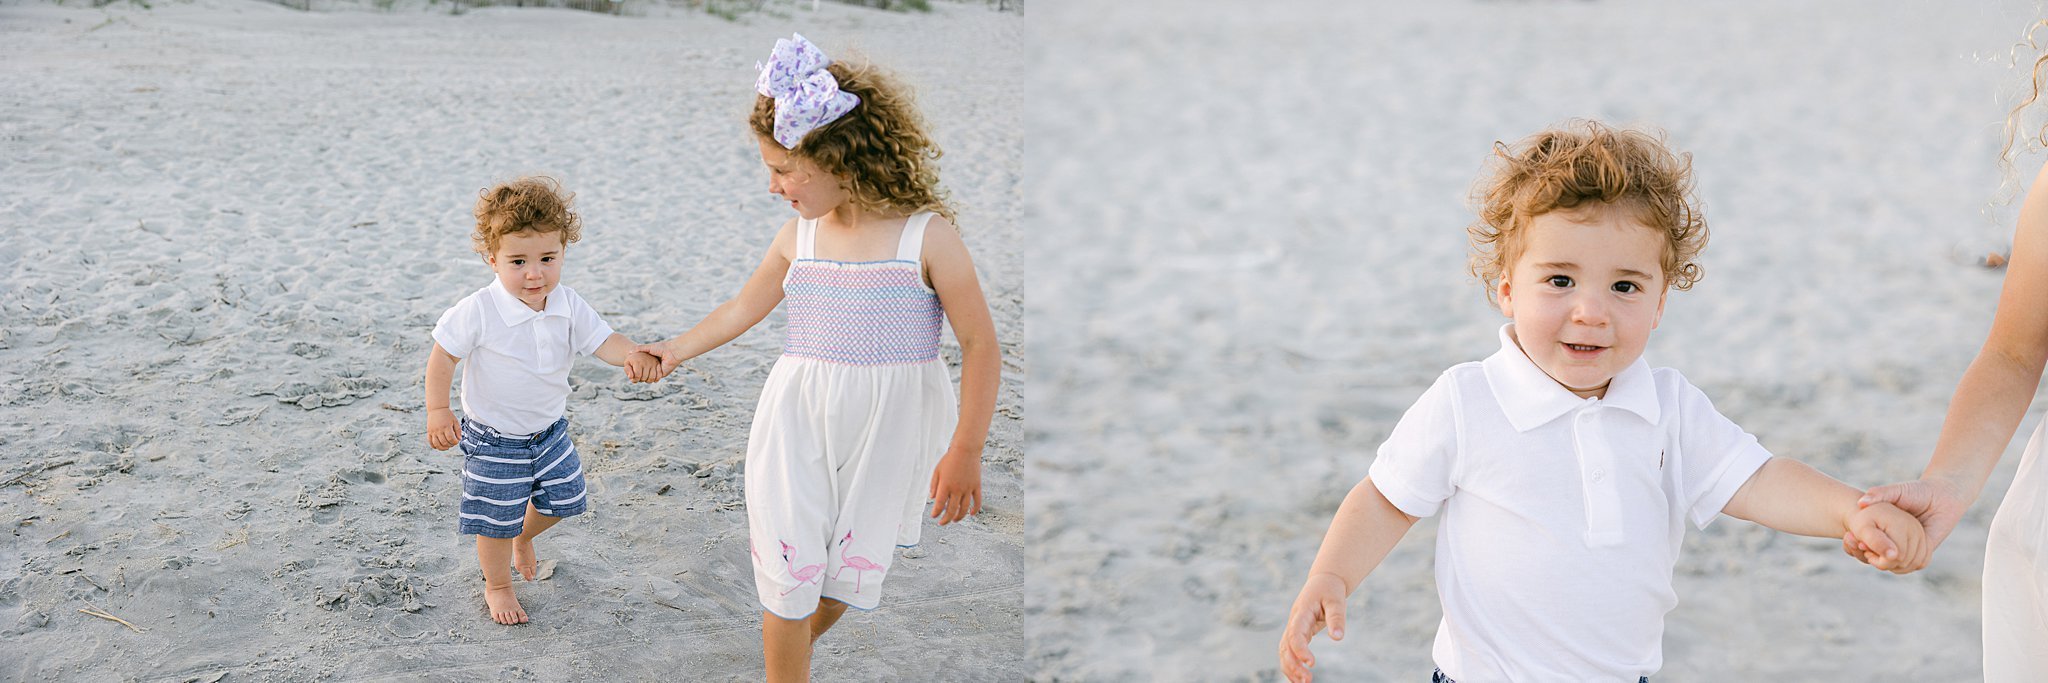 Katherine_Ives_Photography_Chod_Hilton_Head_Extended_Family_Session_116.JPG